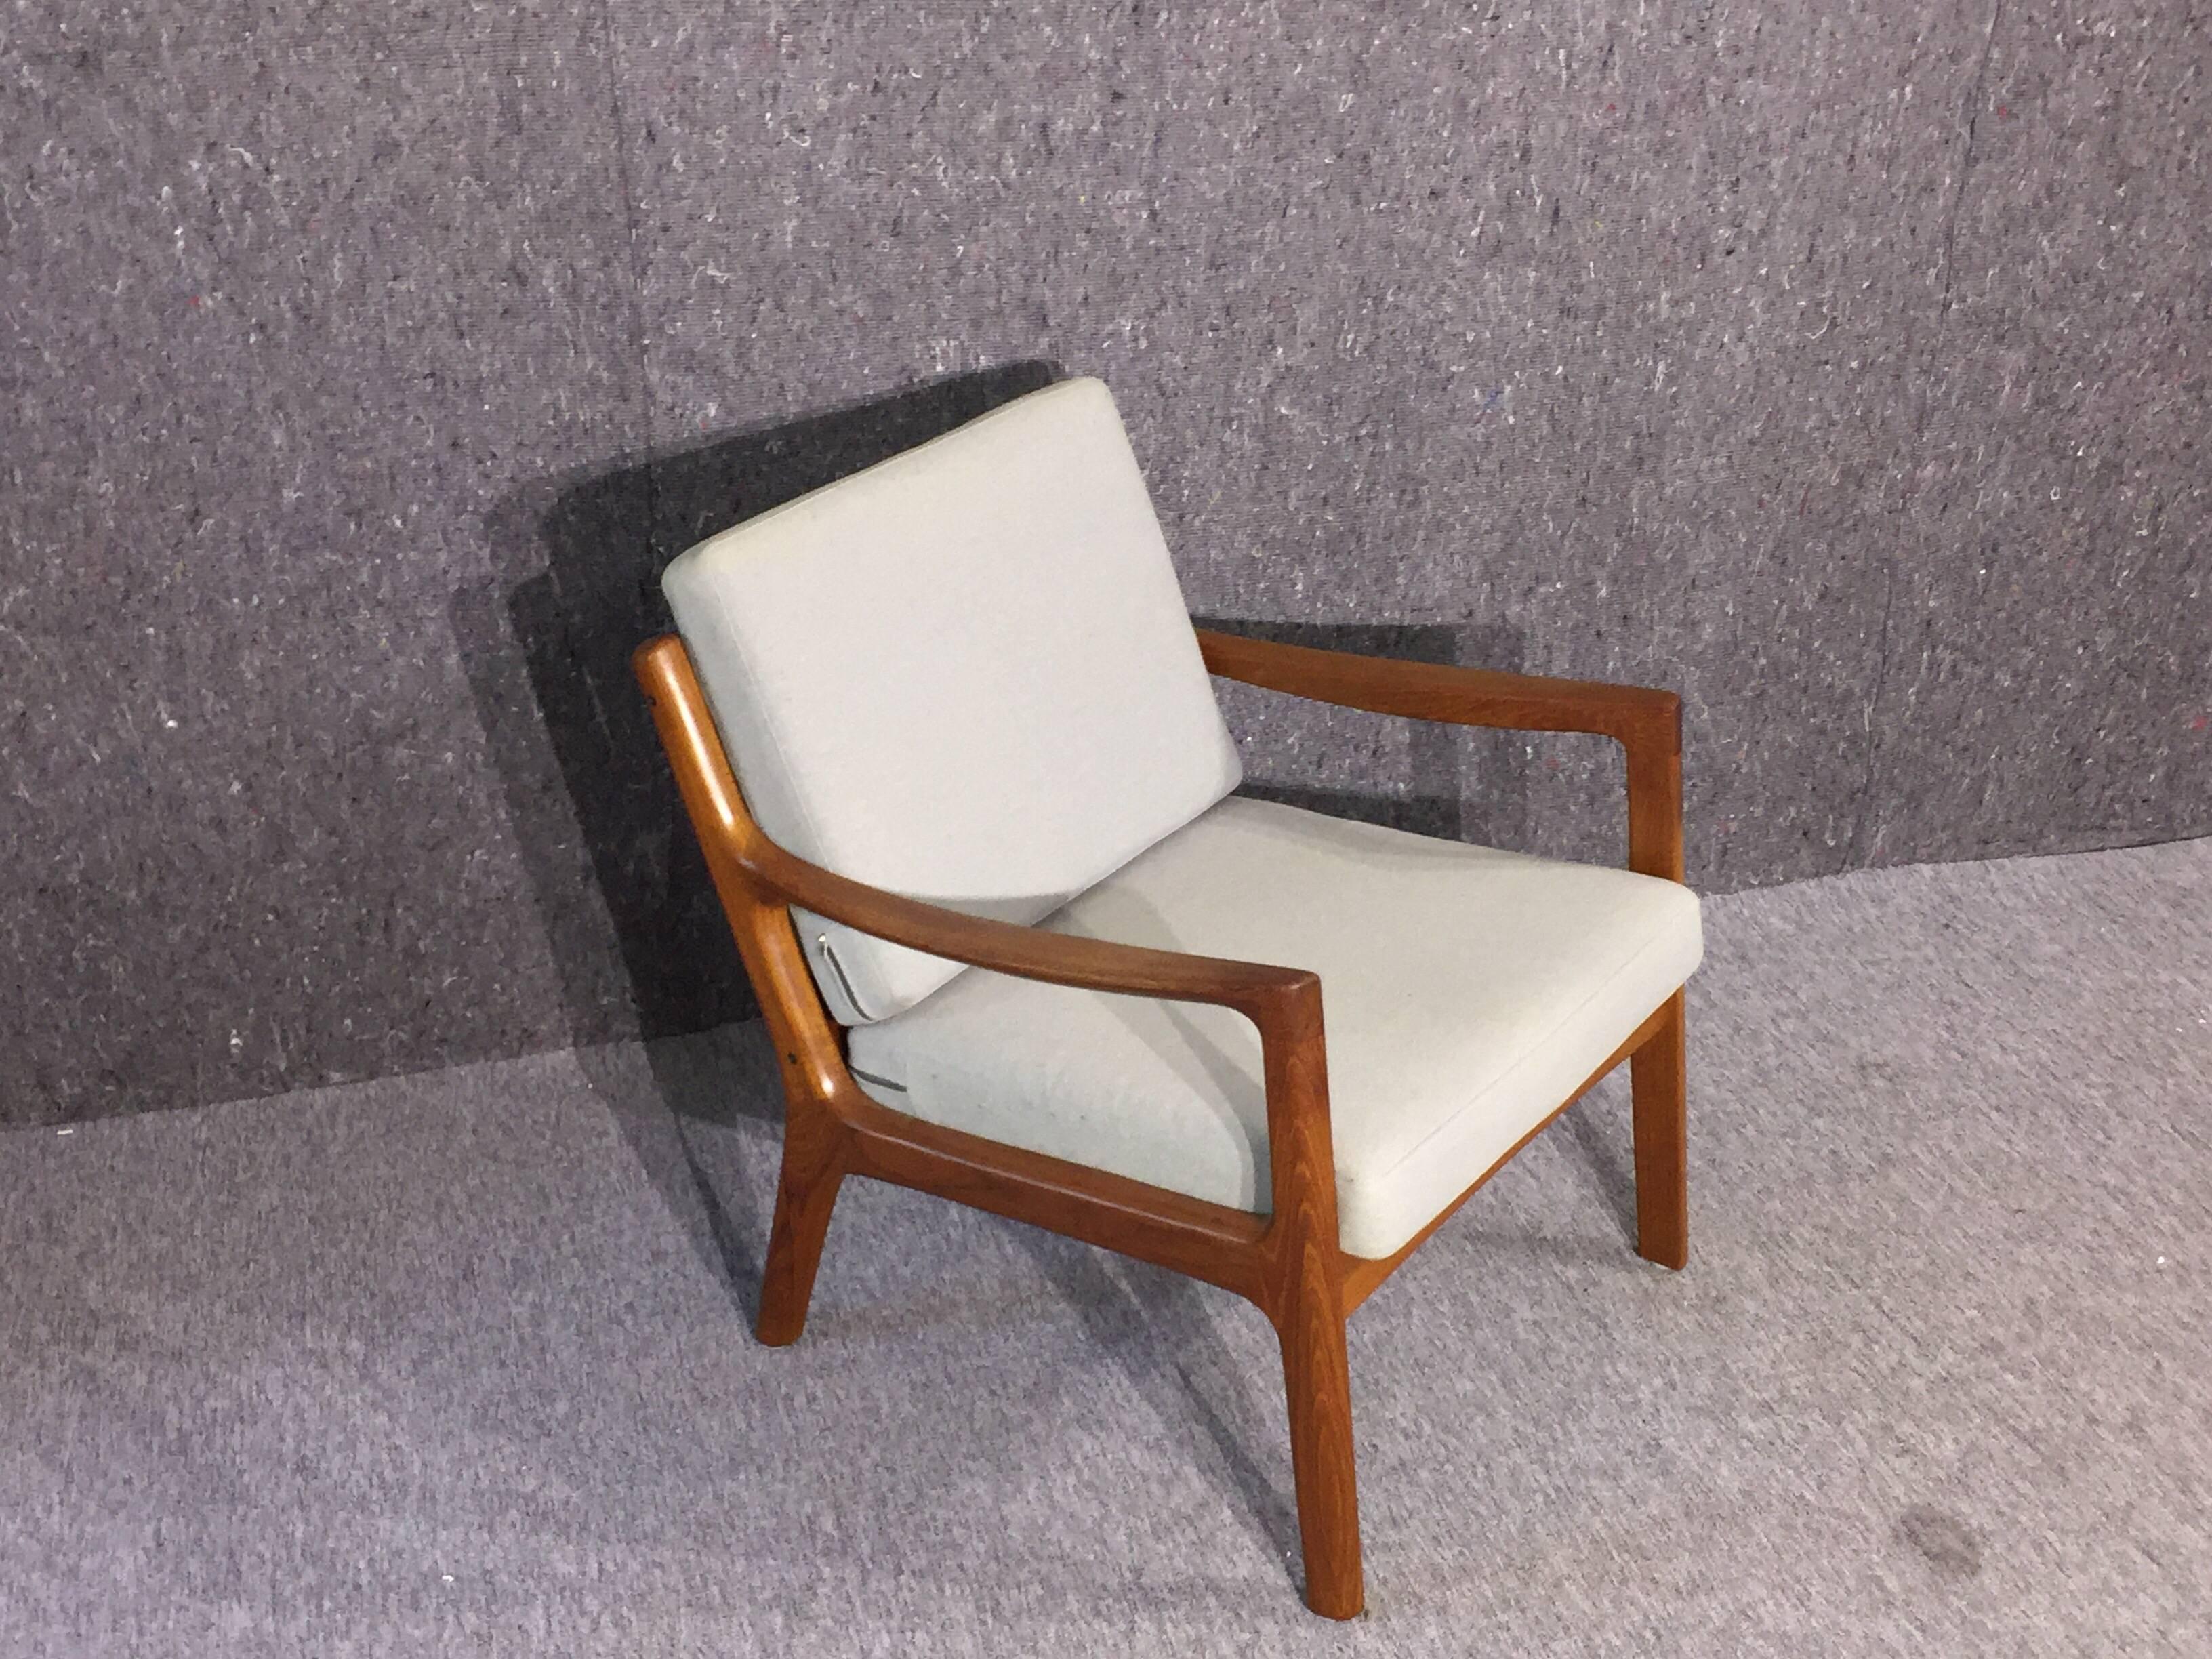 This lounge chair was designed by Ole Wancher in 1951 for Cado (France & Søn) in Denmark. The frame is made in solid teak with spherical armrest. The frames are dowelled and screwed to the side elements, upholstery in light fabric.